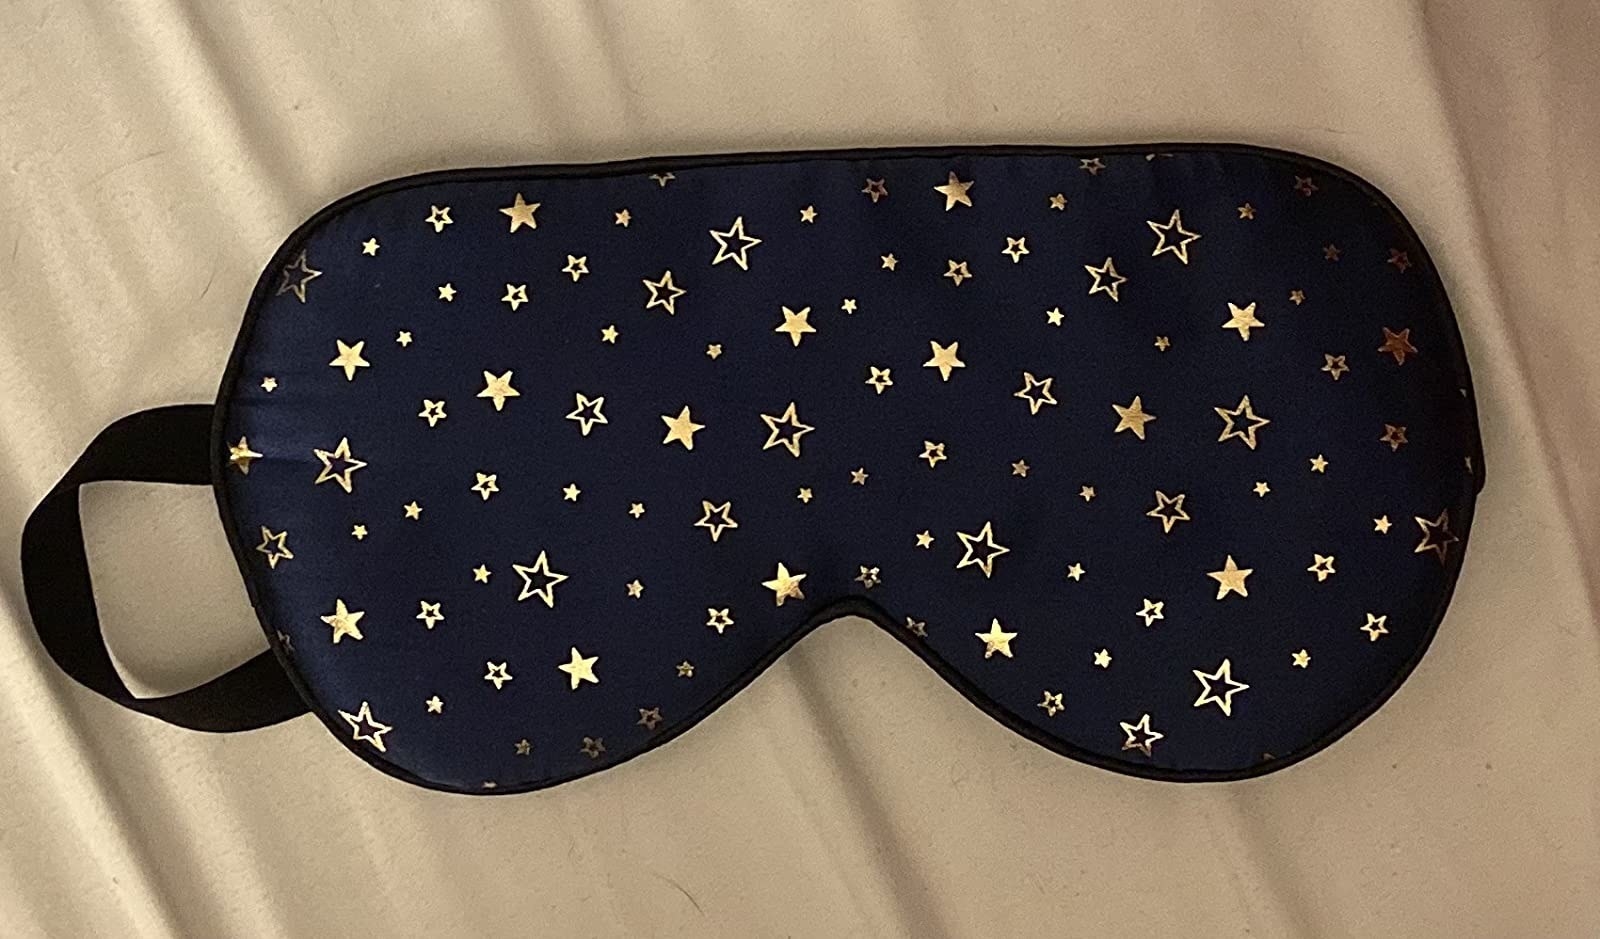 the blue face mask with golden stars on it